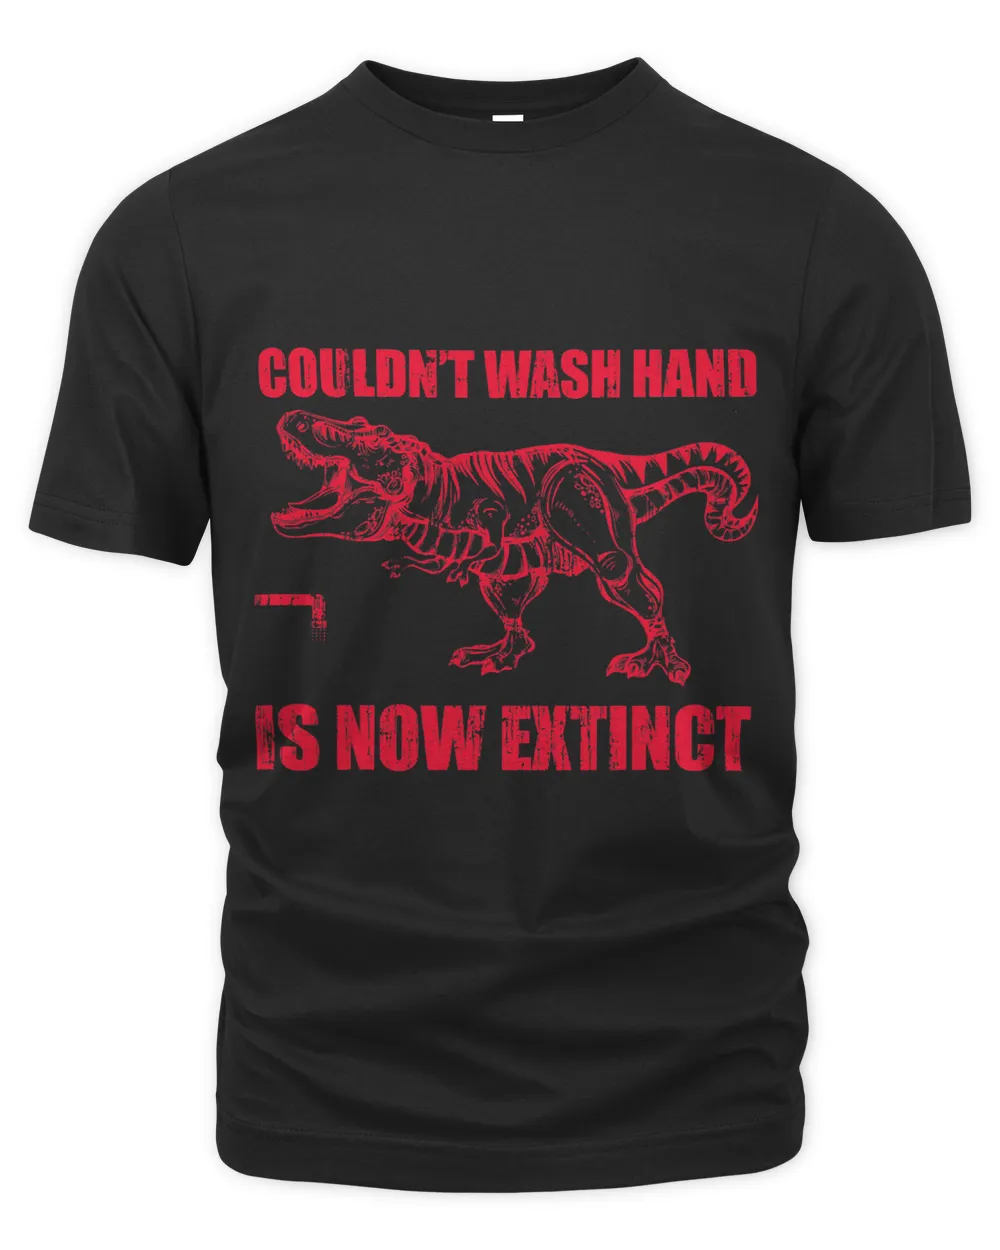 Couldnt wash hand is now extinct funny Trex Dinasour